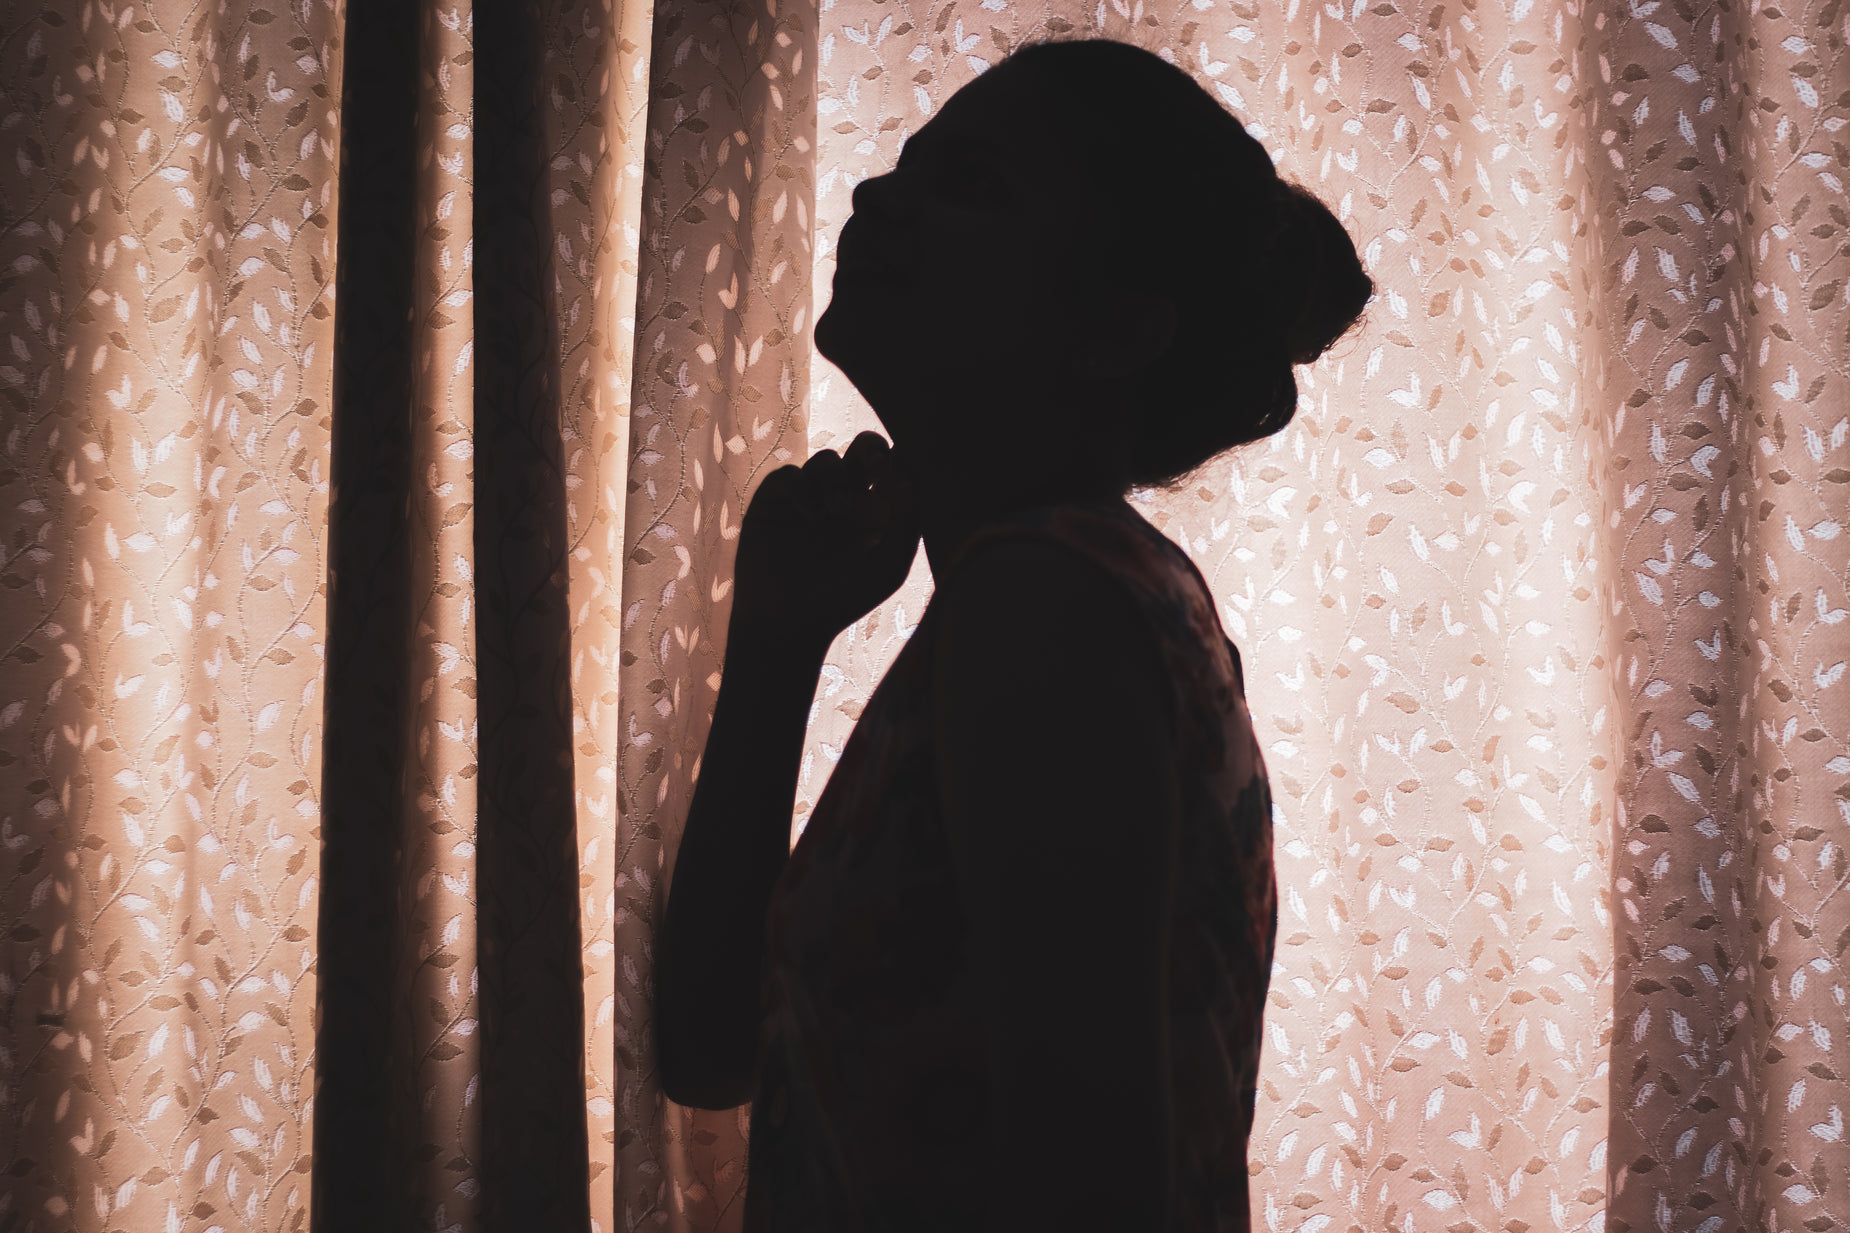 a silhouette of a person in front of a curtain